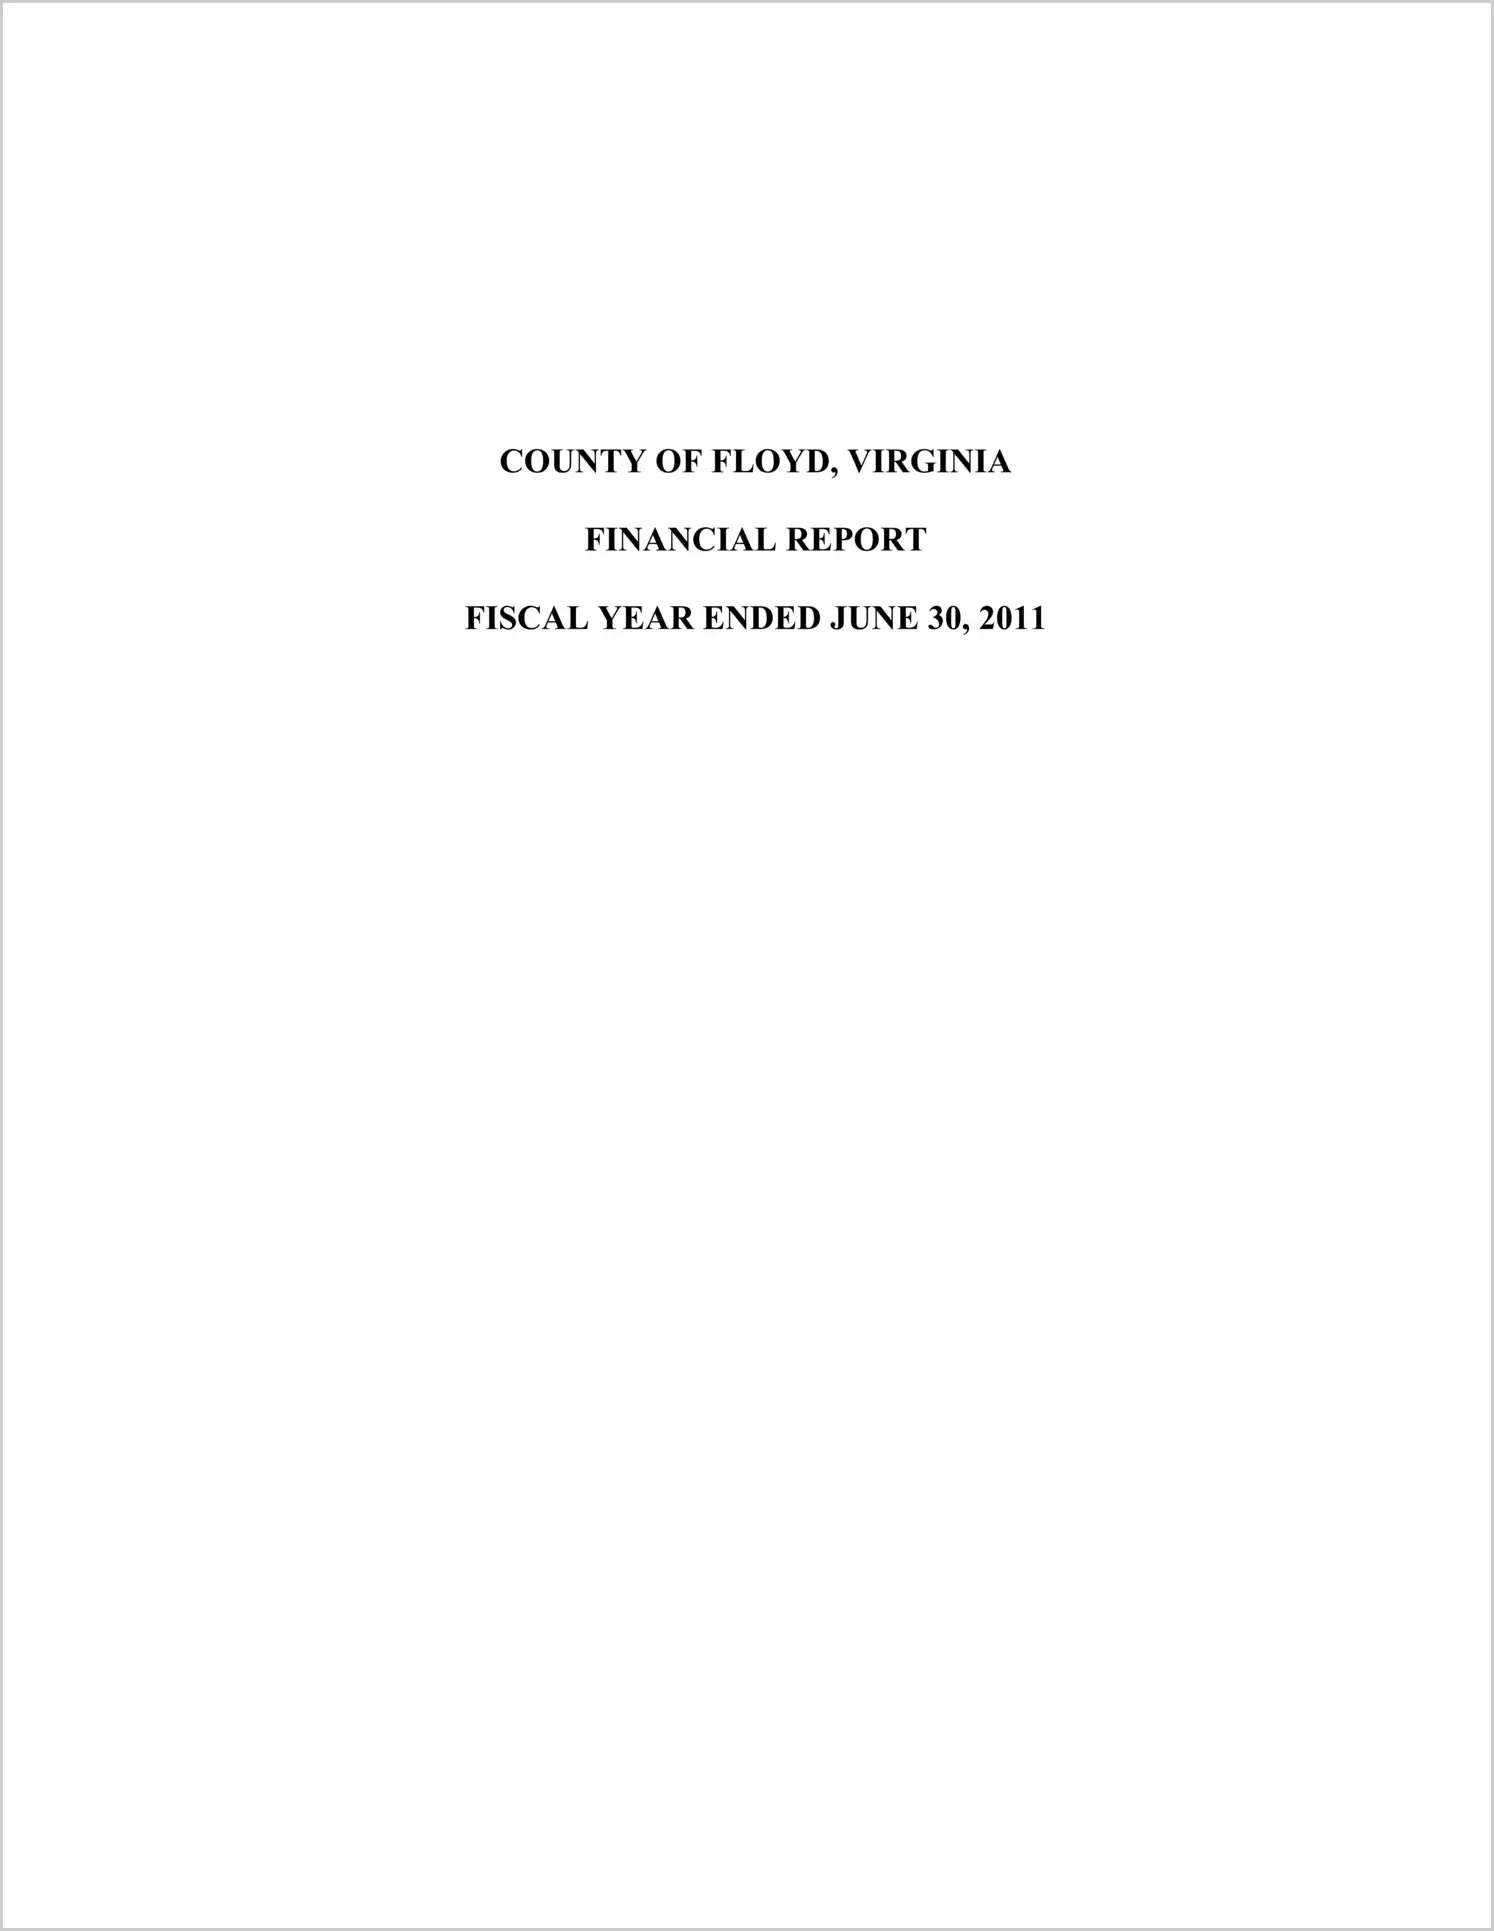 2011 Annual Financial Report for County of Floyd